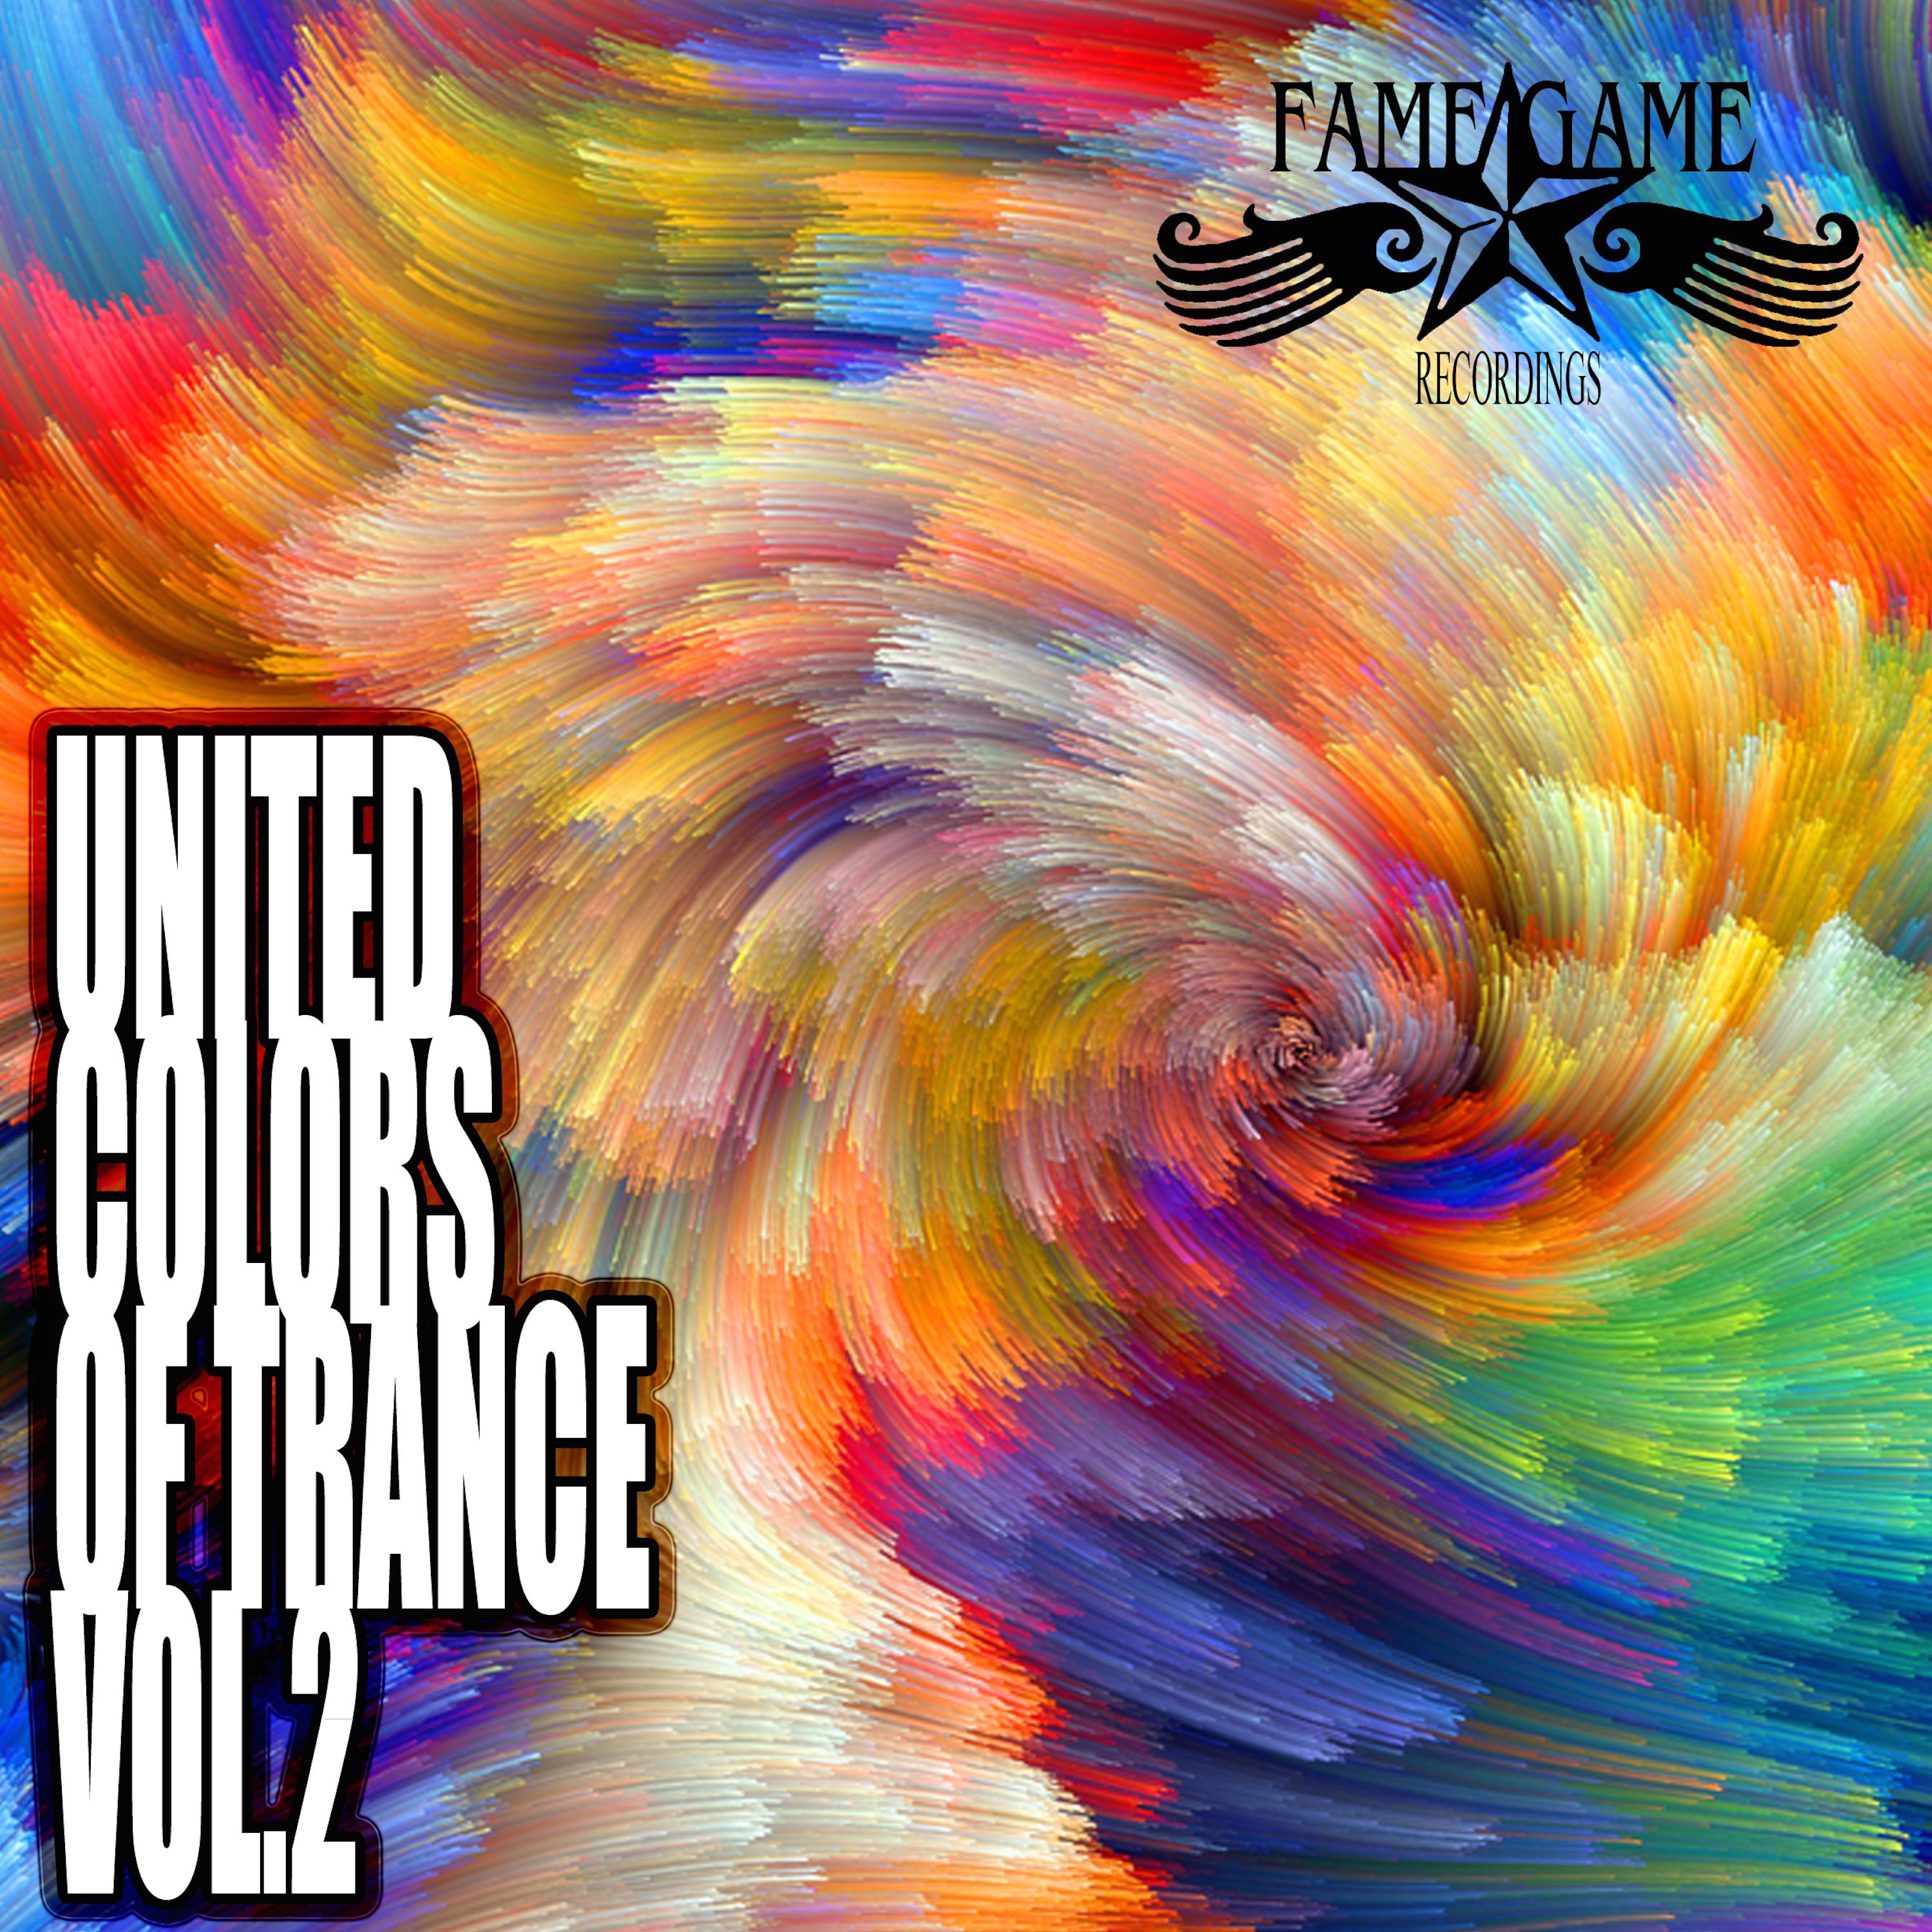 United Colours of Trance, Vol. 2